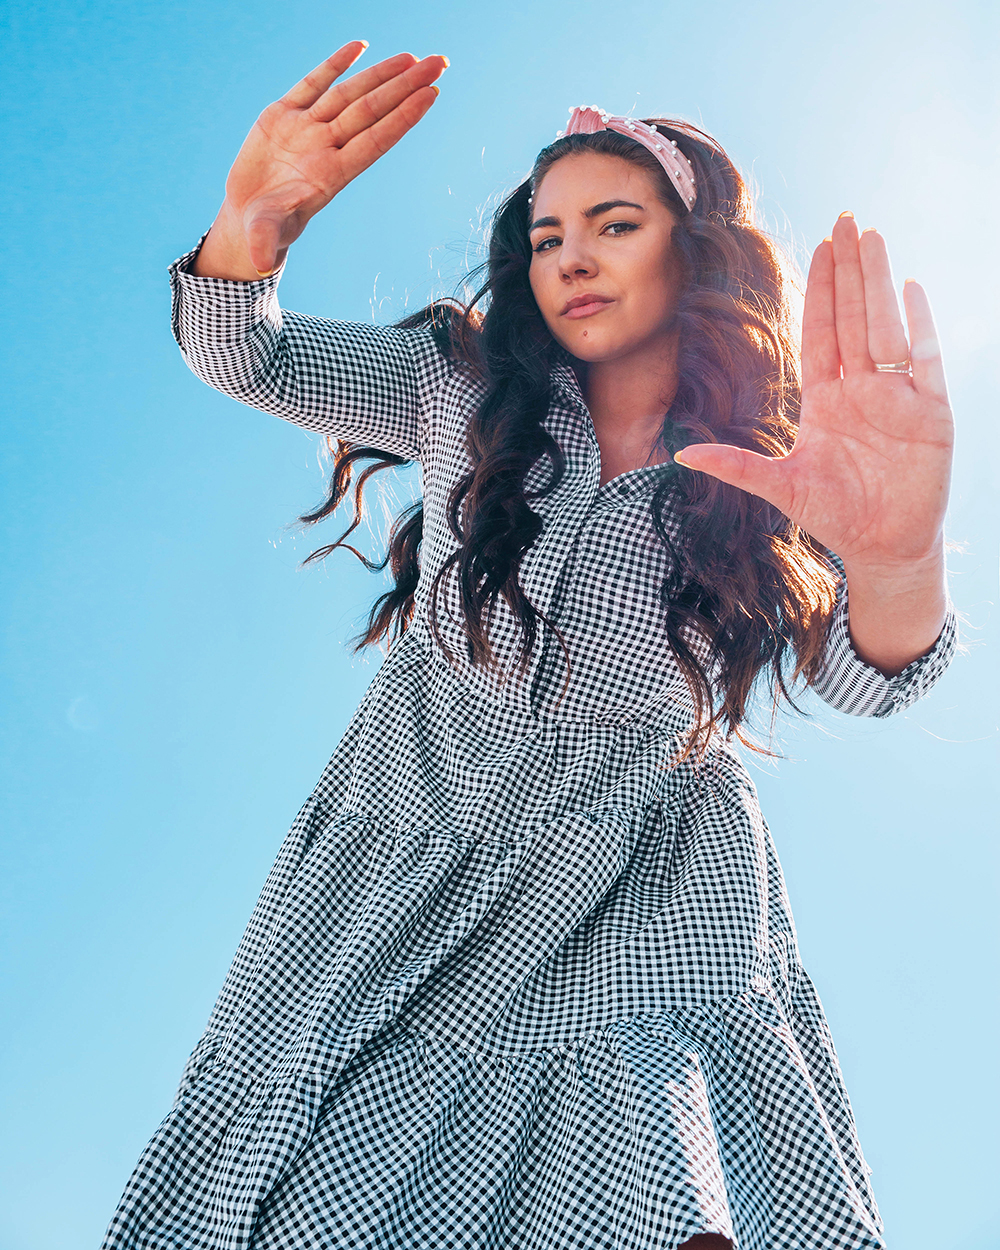 Lauryn Hock facing the camera and holding her hands up to frame it. She's wearing a gingham dress and big, pink headband on her loosely curled hair